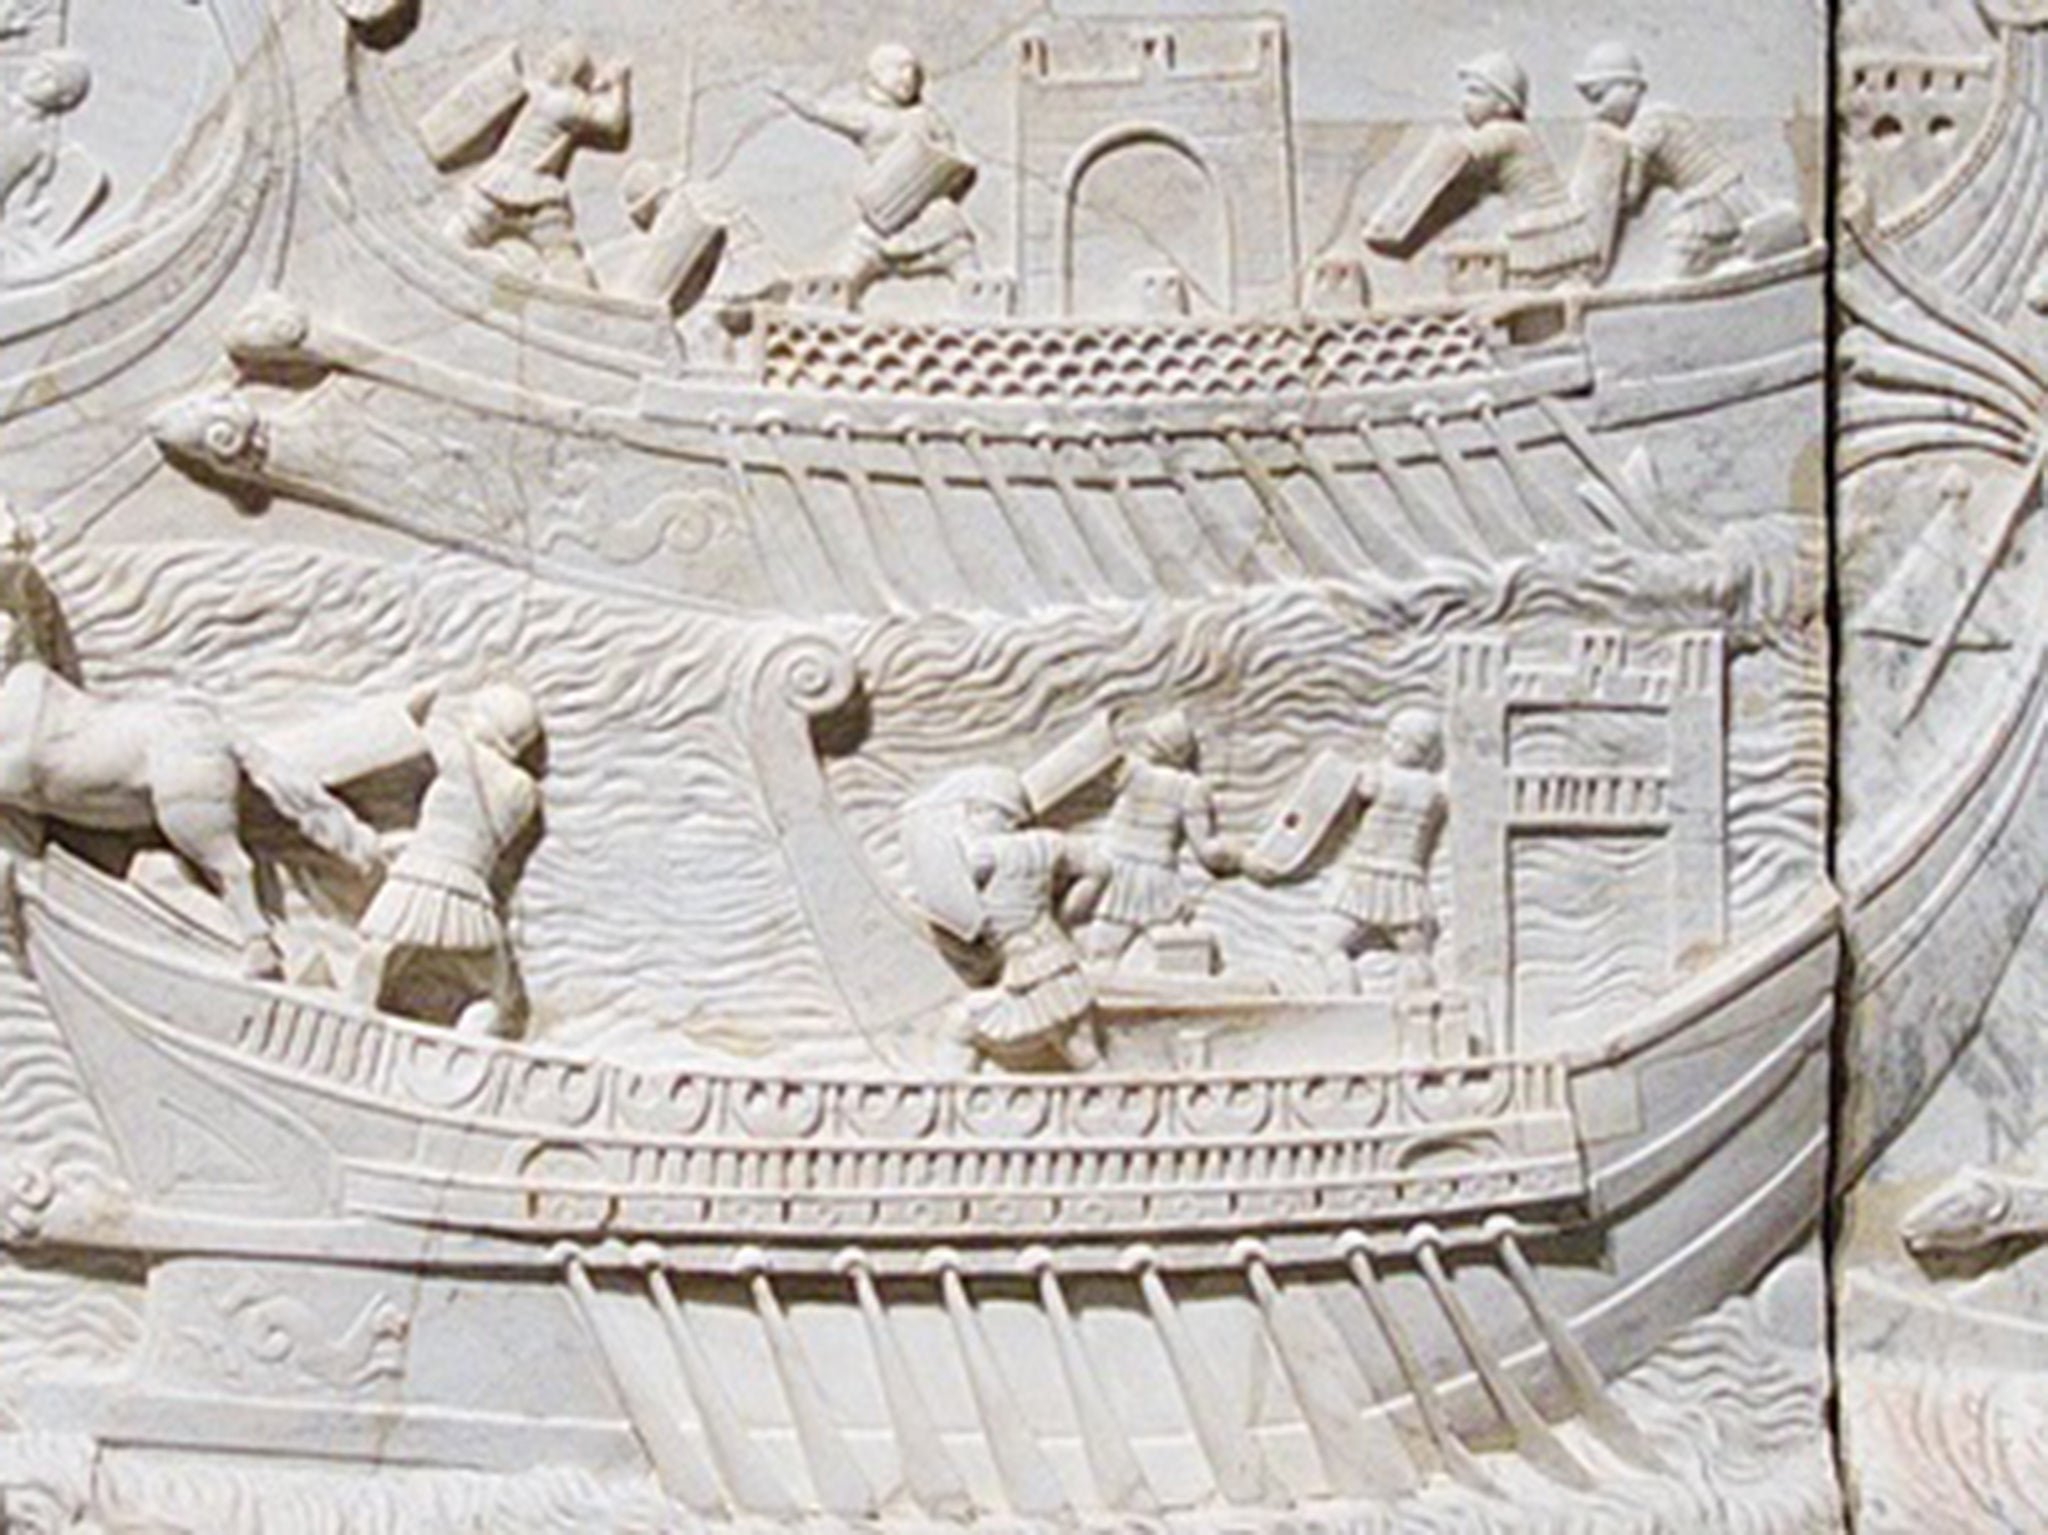 Two action images of the sea battle of Actium – the clash of arms that gave birth to the Roman Empire